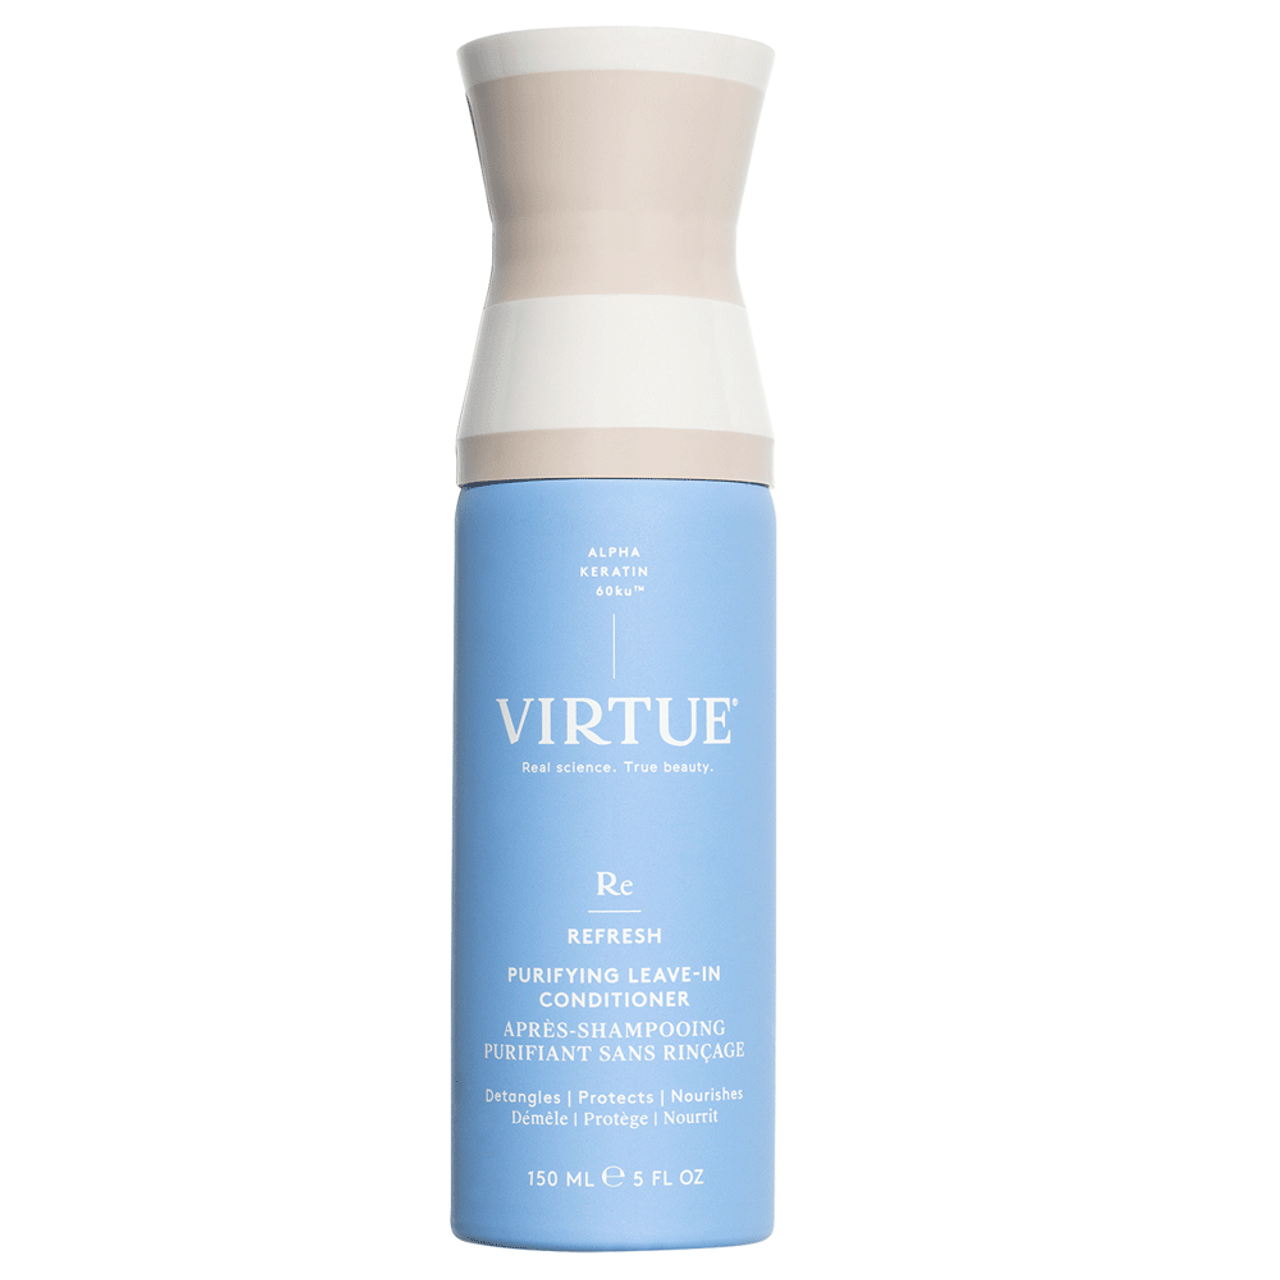 Virtue Refresh Purifying Leave-In Conditioner BeautifiedYou.com